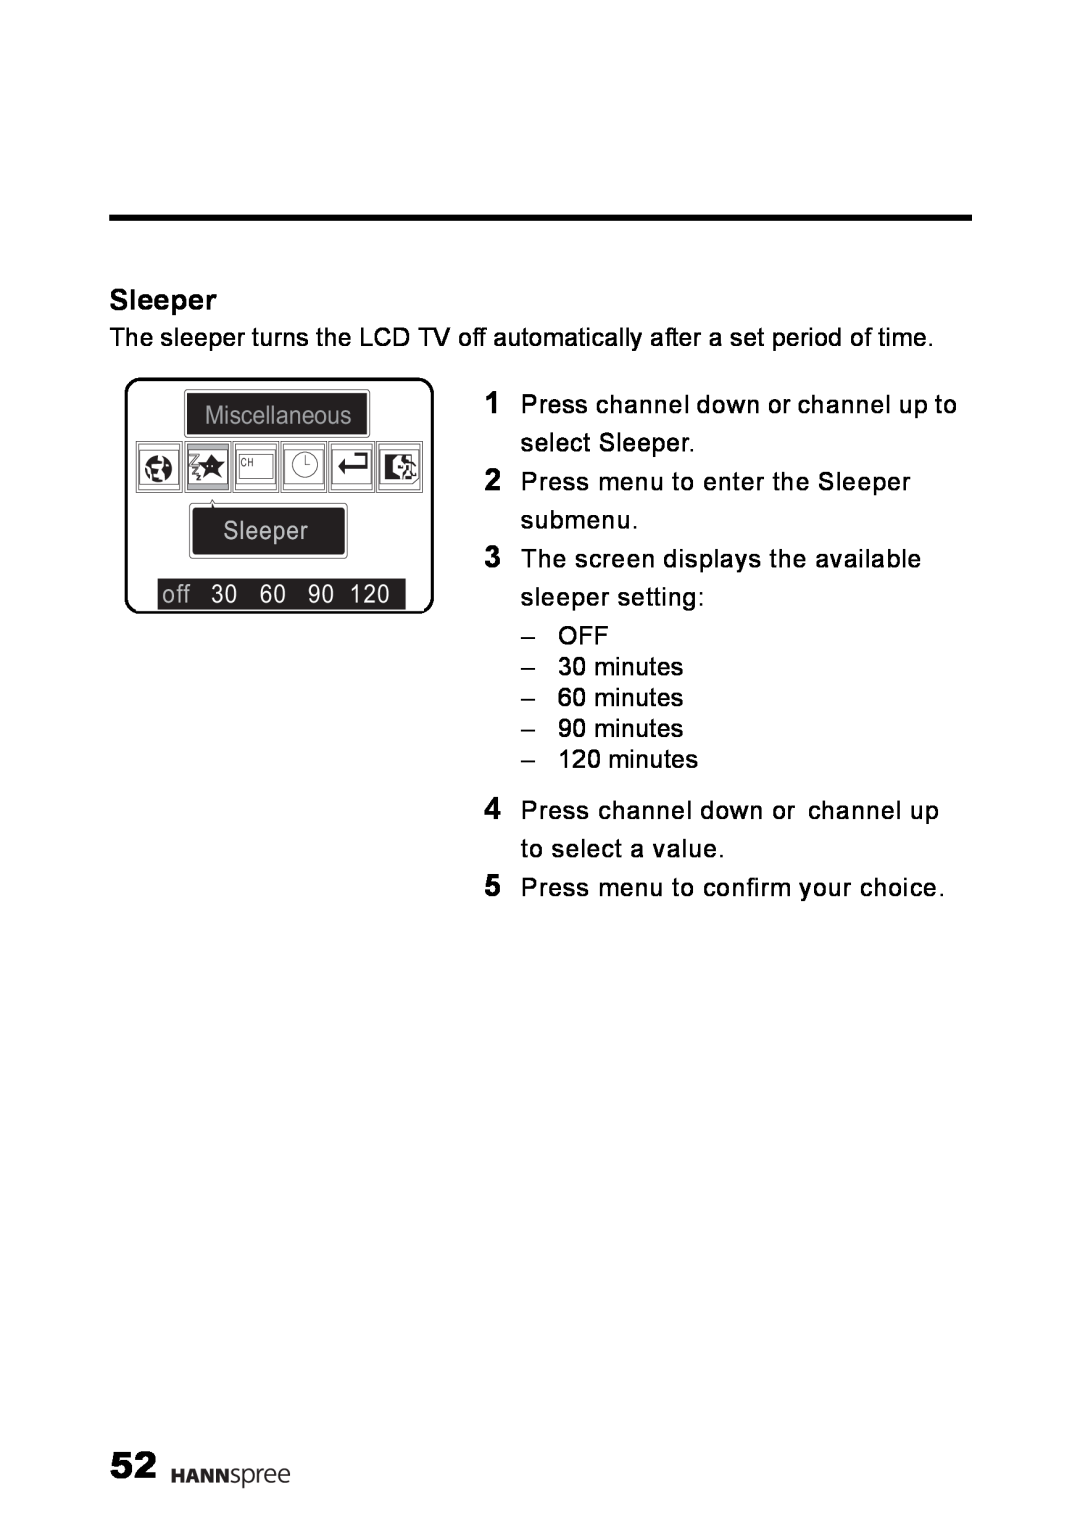 HANNspree LT09-10U1-000 user manual Miscellaneous, off 30 60 90, Press channel down or channel up to select Sleeper 